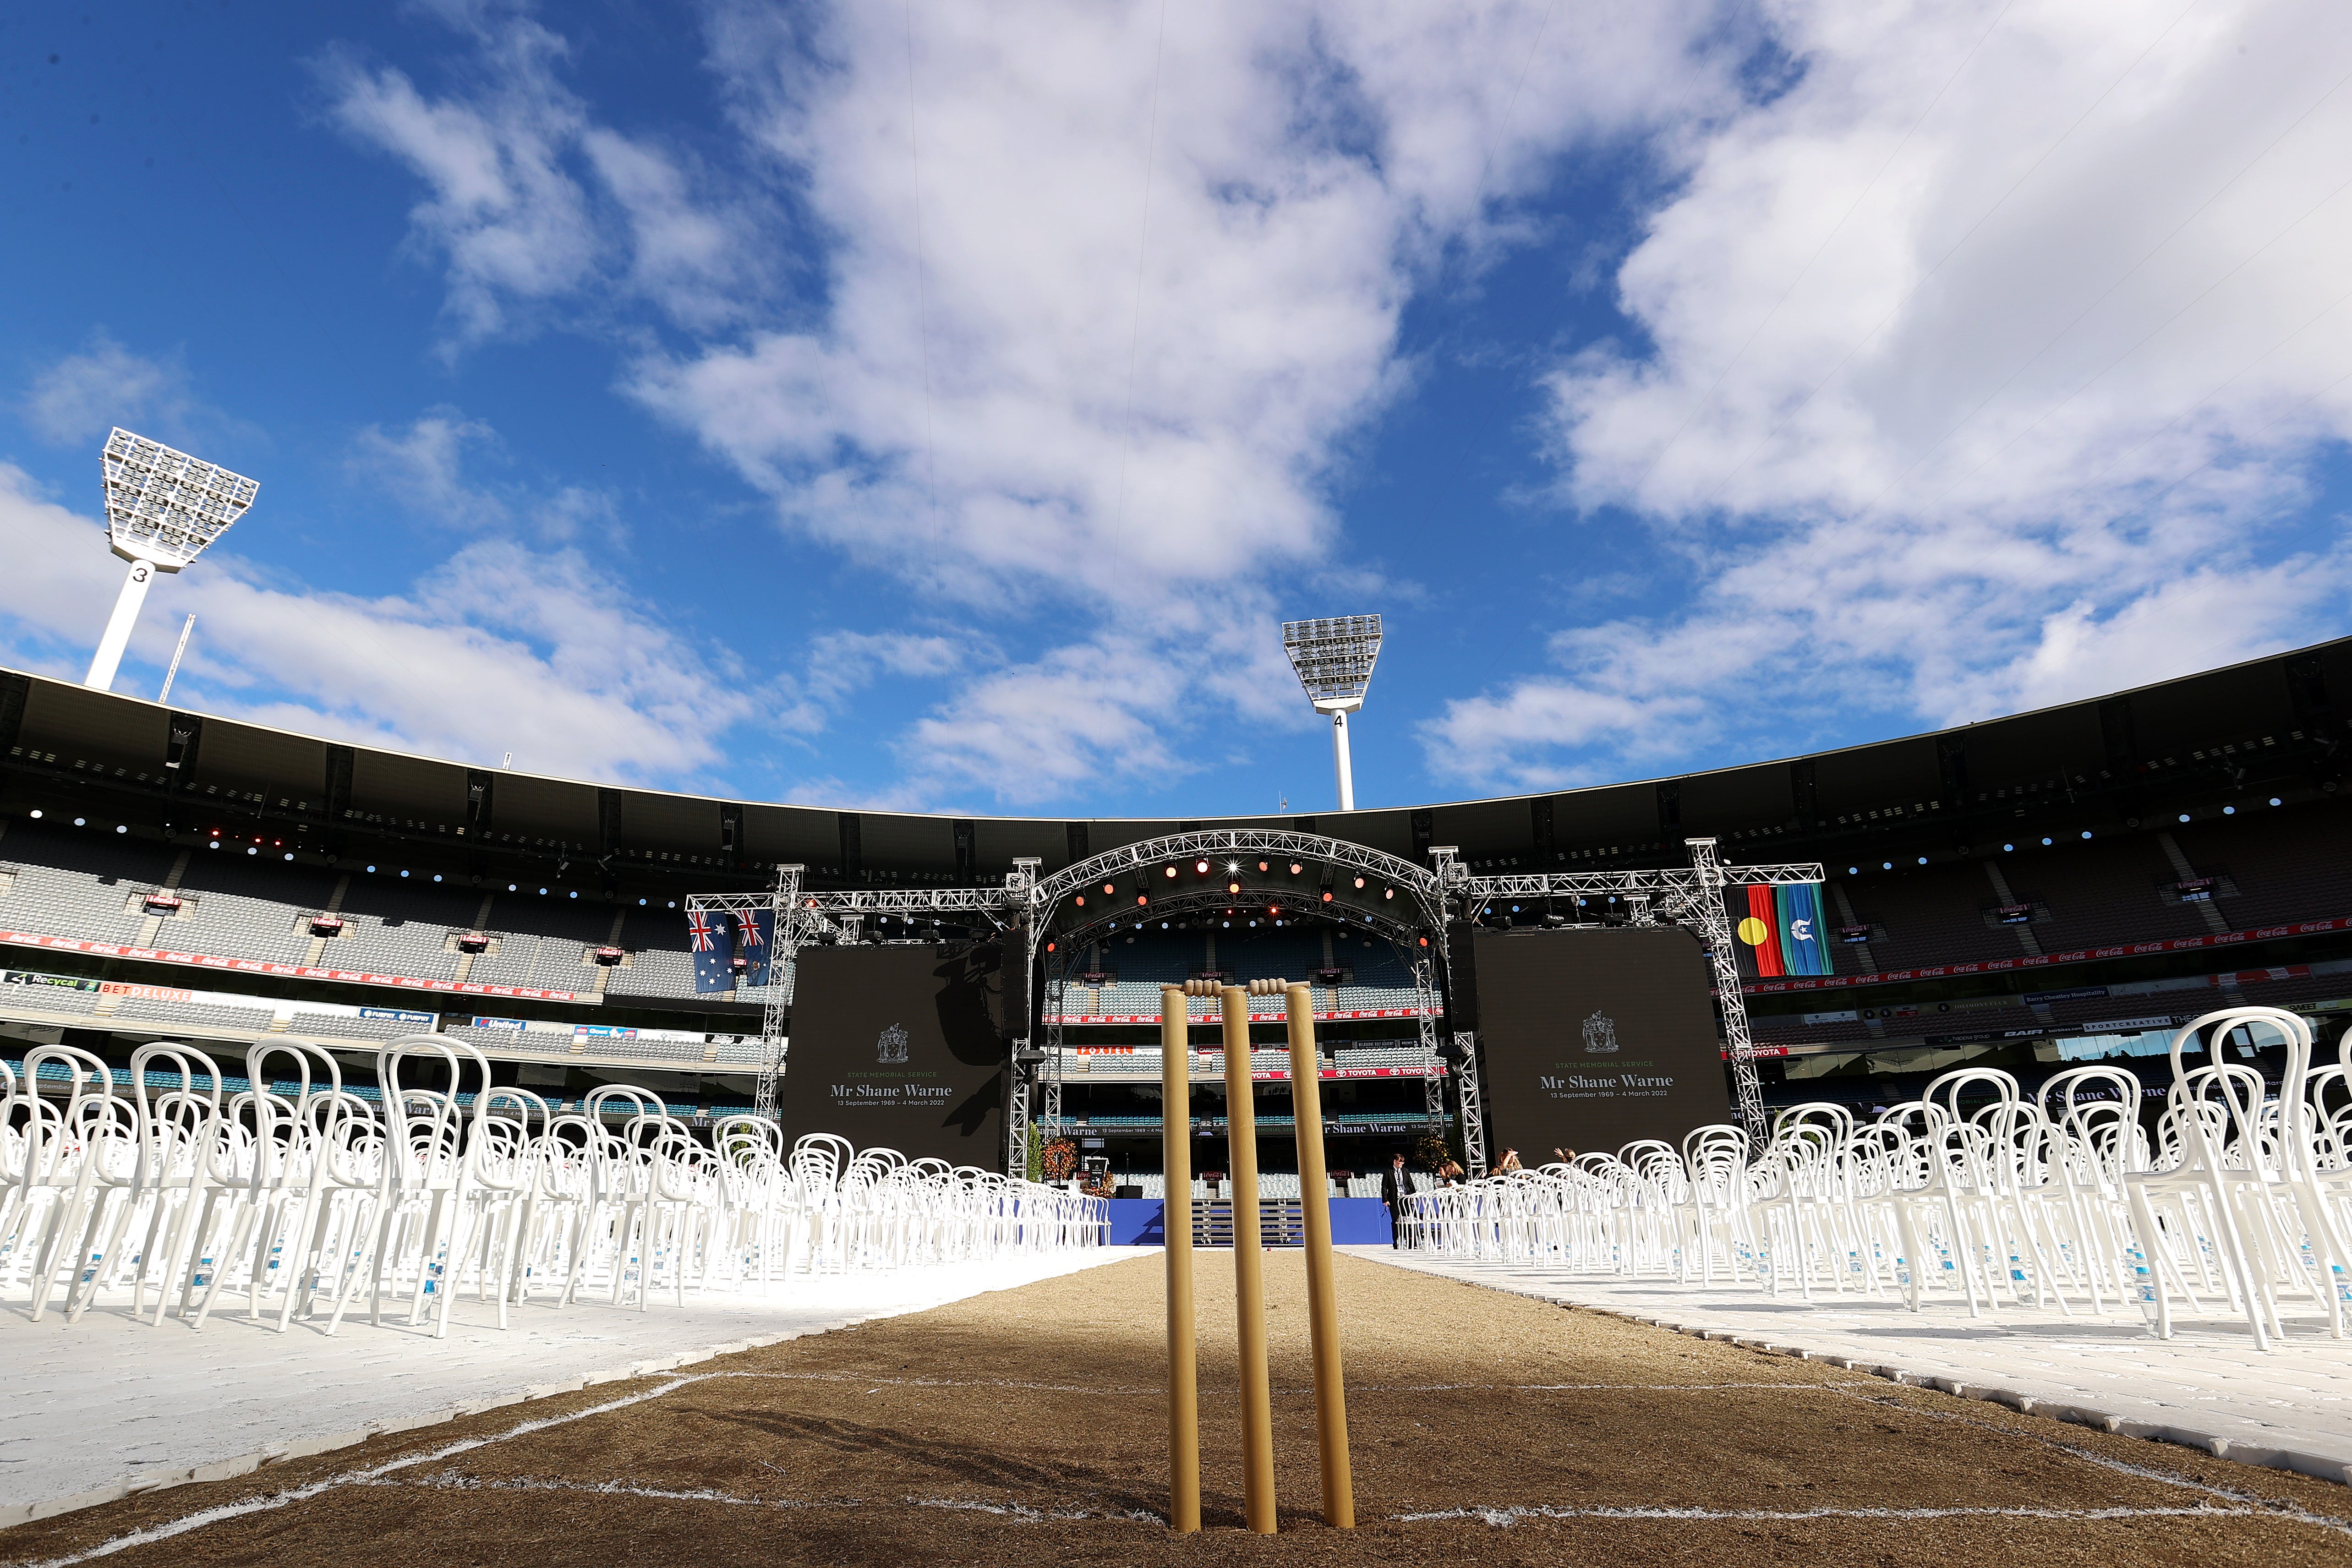 Melbourne Cricket Ground gears up for Shane Warne’s state funeral